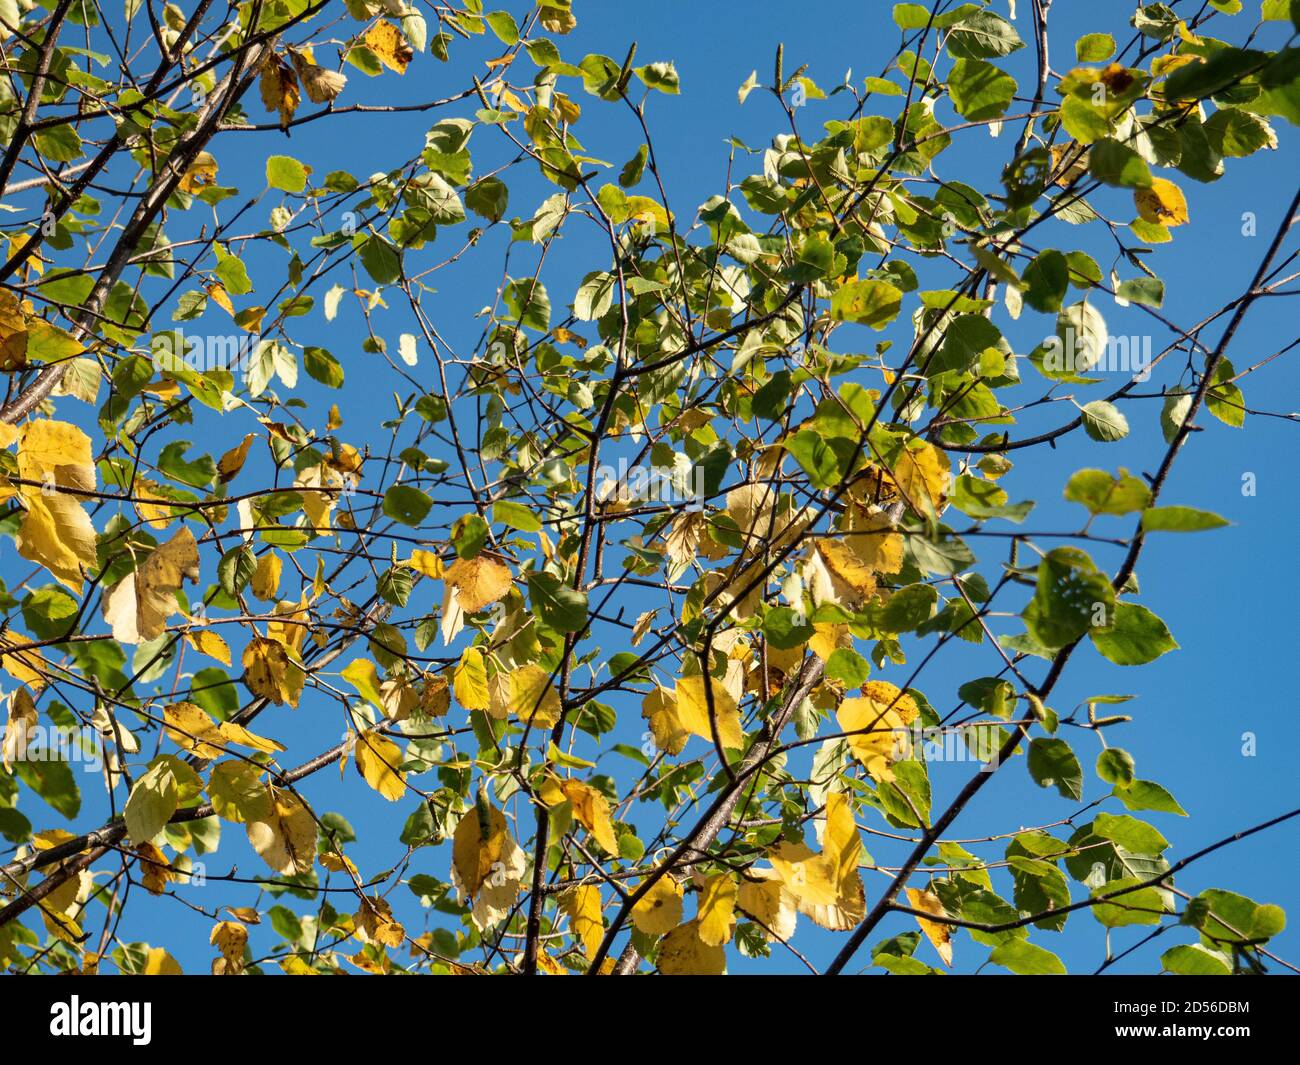 The foliage of Betula ermanii against a clear blue sky in the early autumn as the leaves begin to turn a bright golden colour Stock Photo